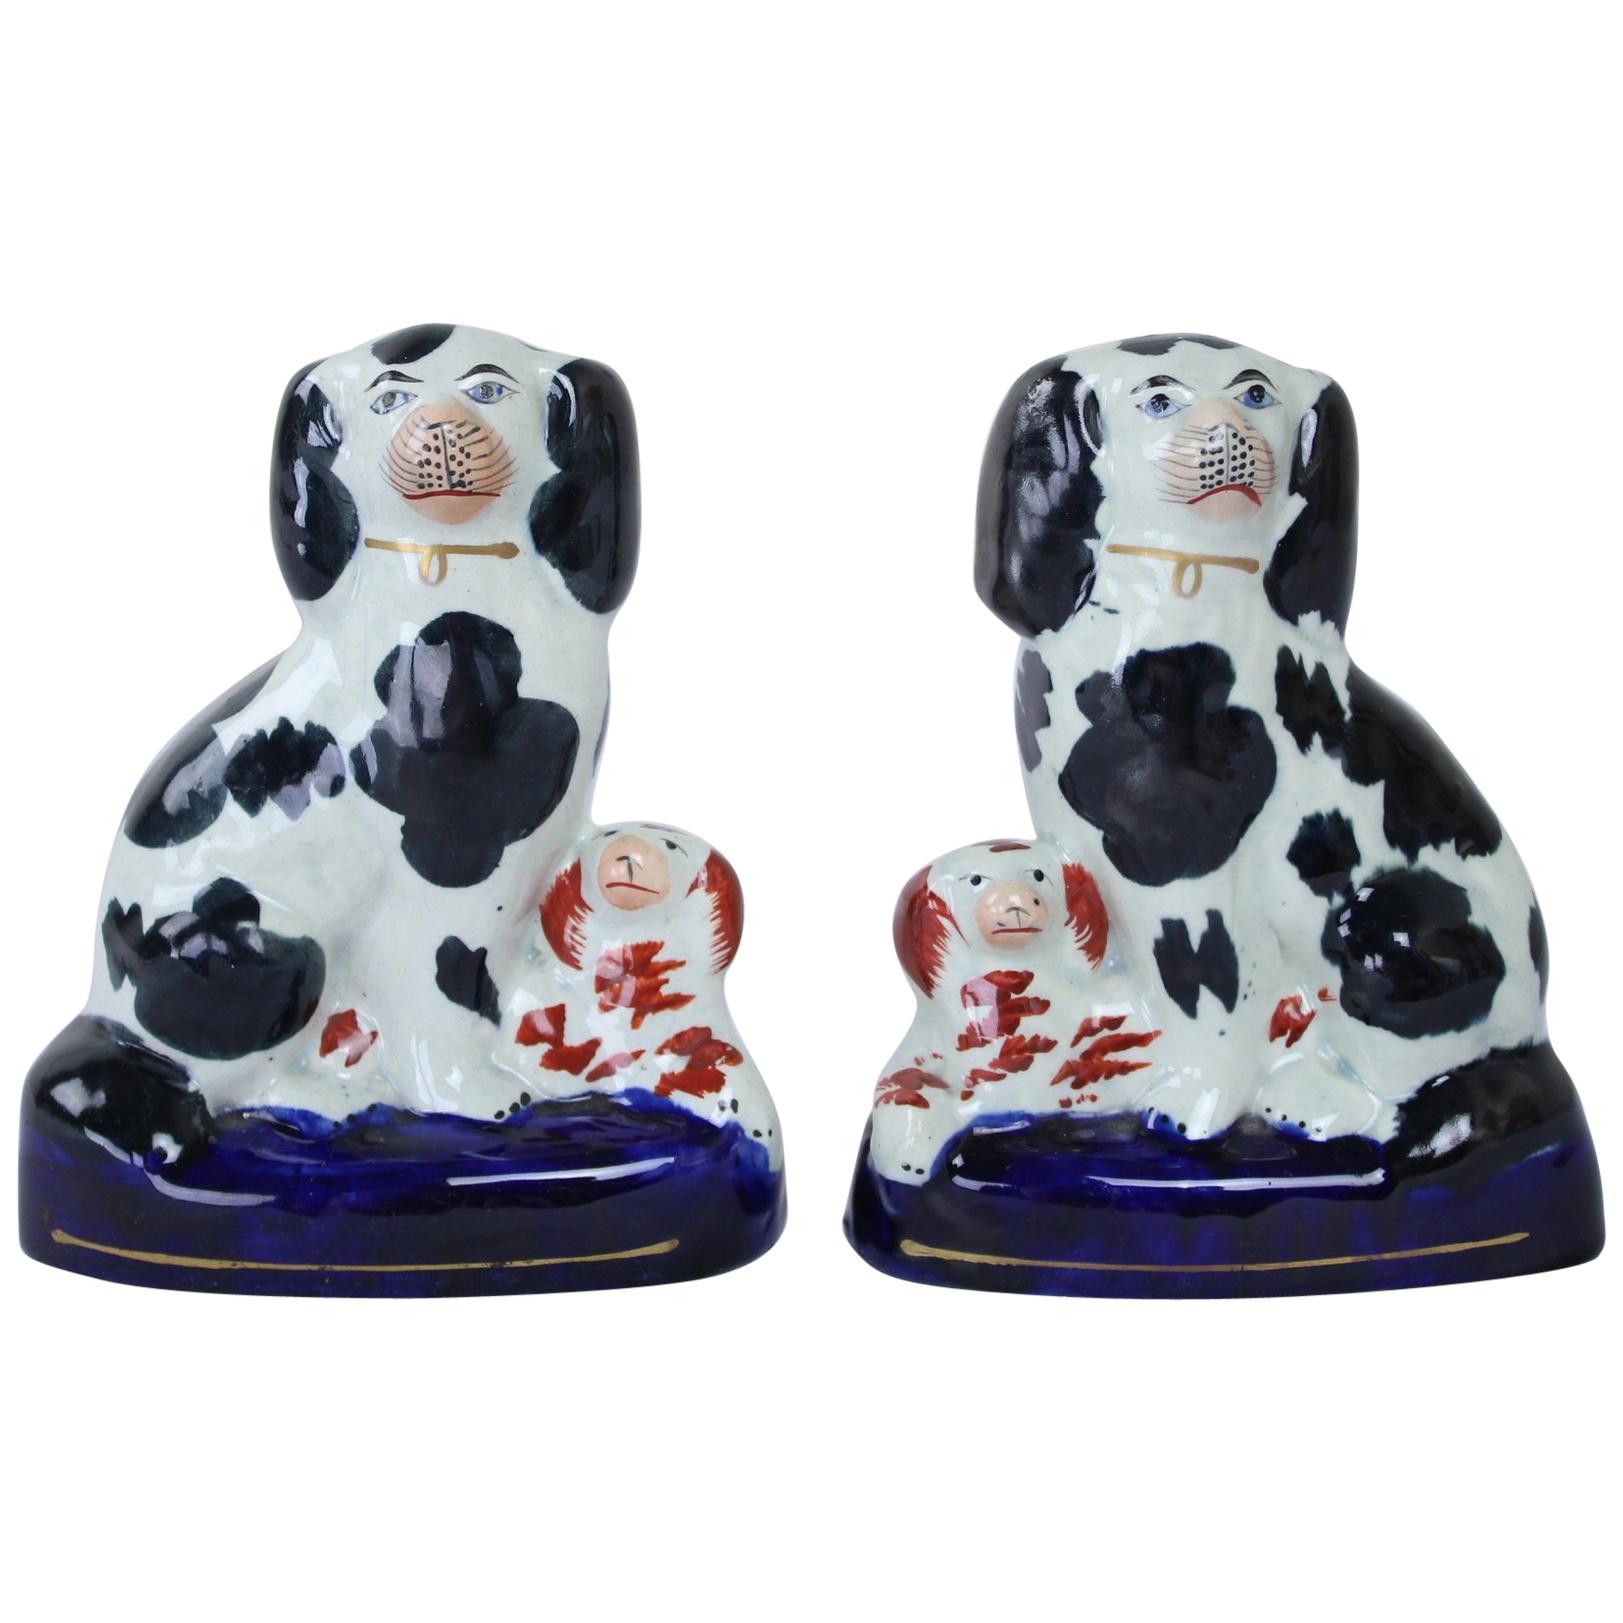 Pair of Decorative English Staffordshire Pottery Dogs